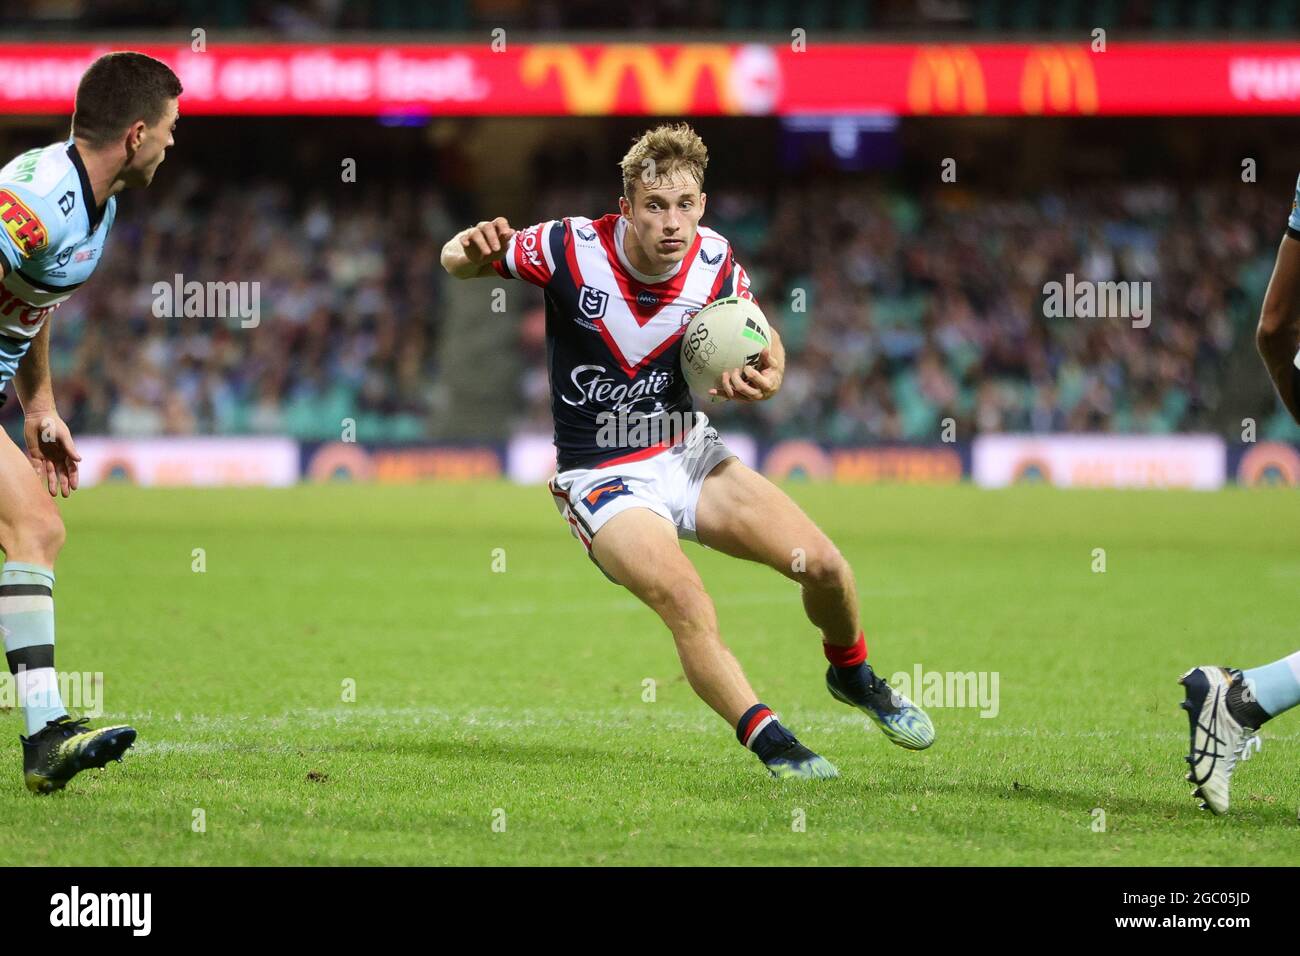 SYDNEY, AUSTRALIA - APRIL 10: Sam Walker of the Roosters about to score a try during the round five NRL match between the Sydney Roosters and Cronulla Sharks at the Sydney Cricket Ground on April 10, 2021 in Sydney, Australia.  Credit: Pete Dovgan/Speed Media/Alamy Live News Stock Photo